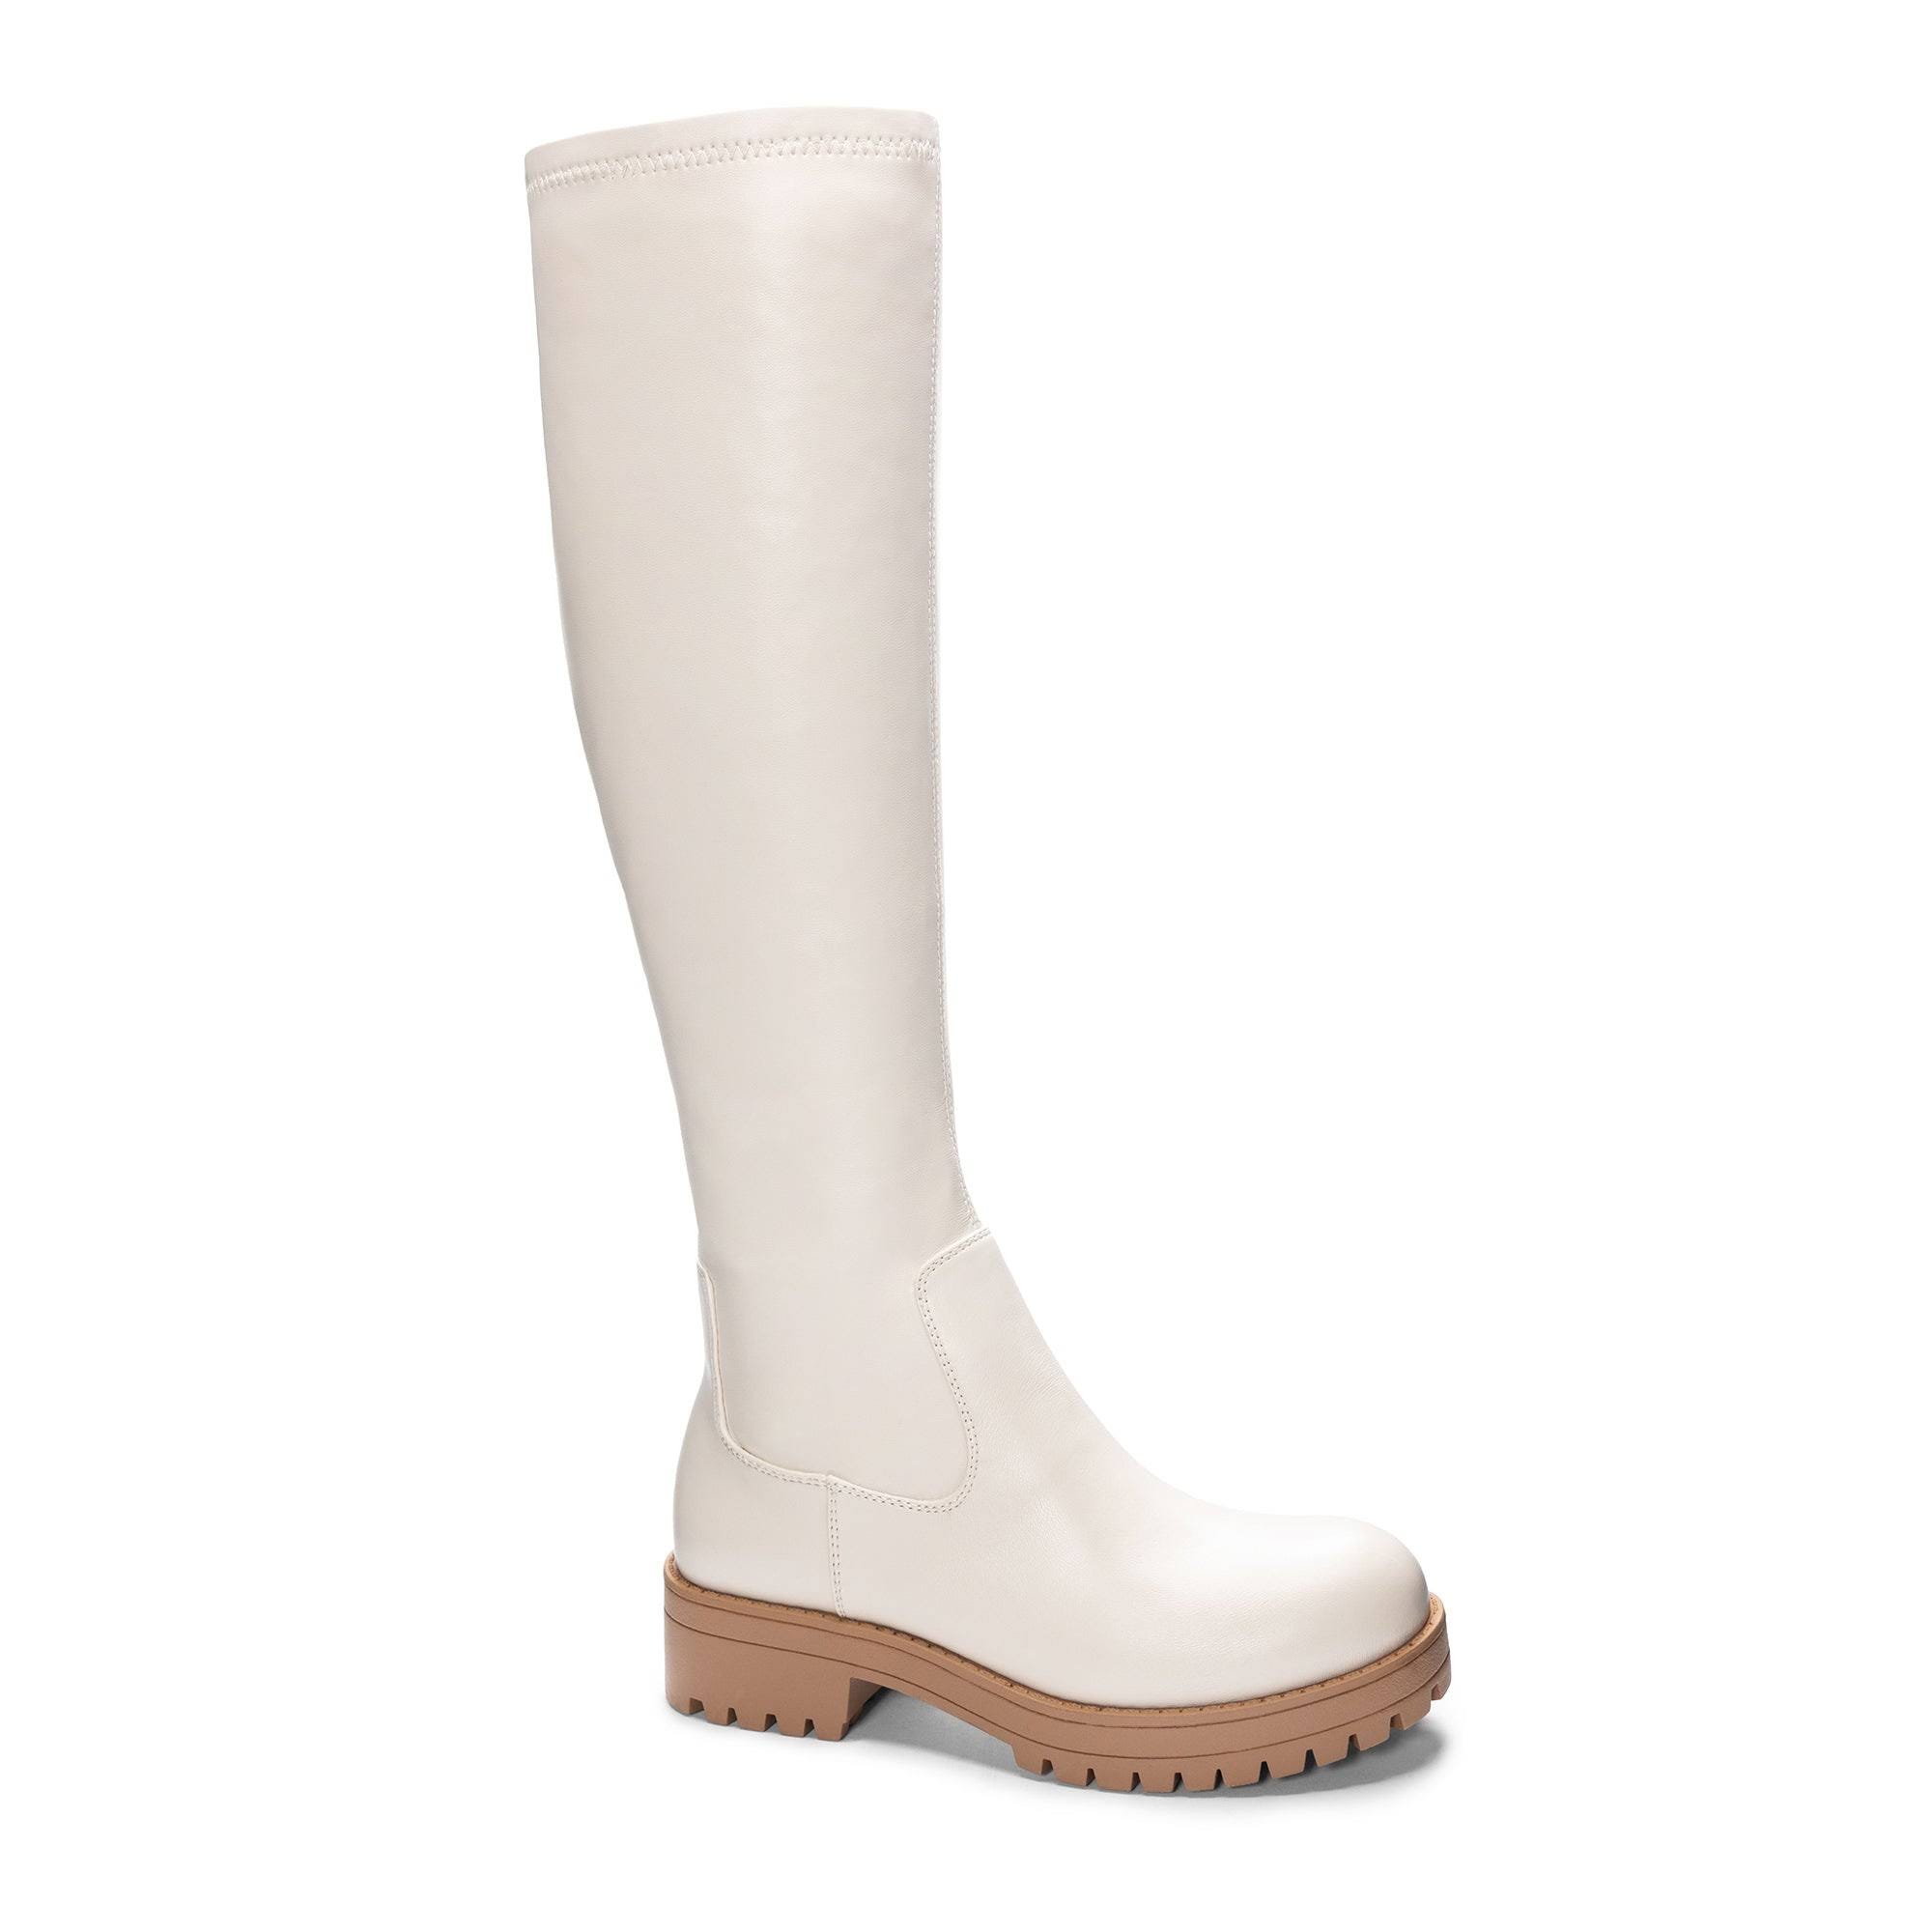 Stretchy Vegan Cream Suede Knee-High Boot with Lug Sole | Image